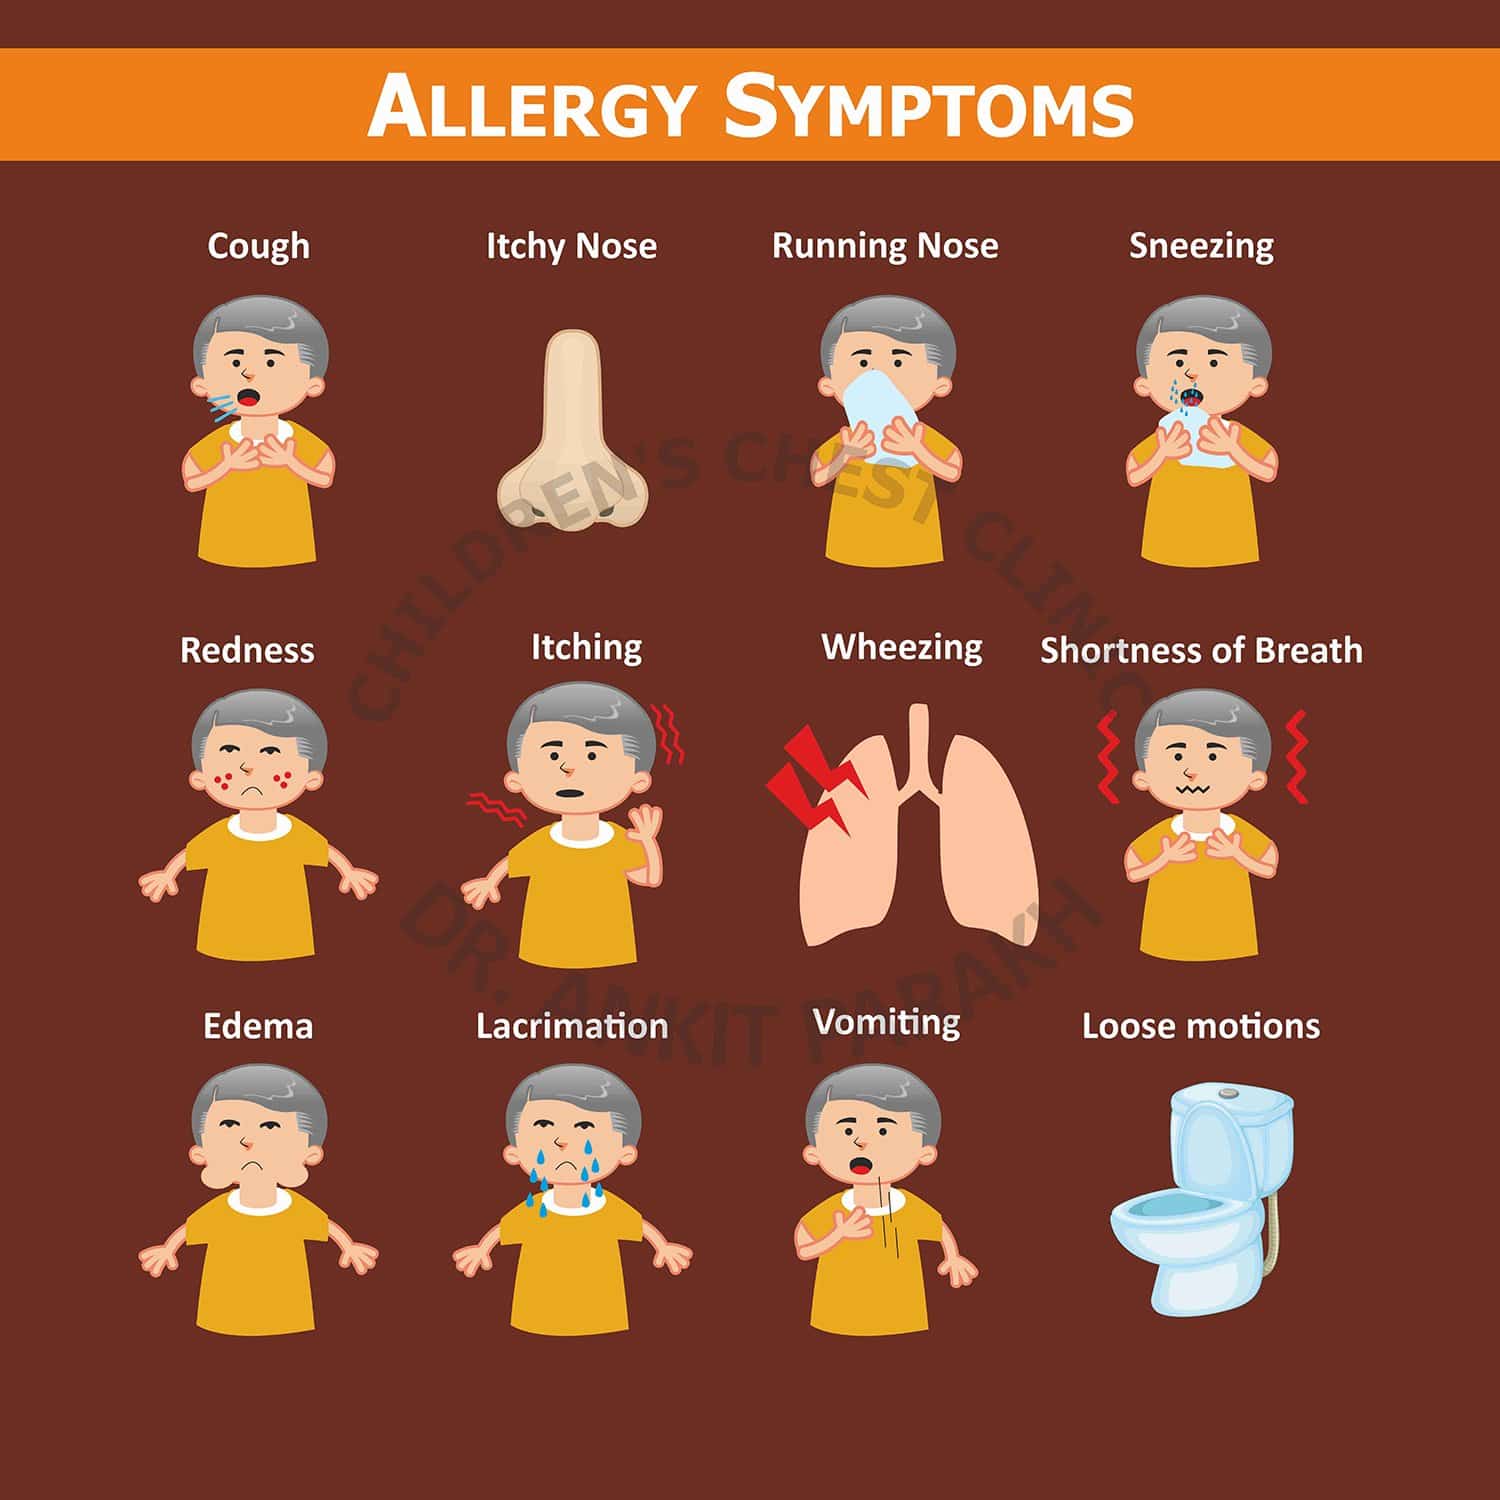 What are the common symptoms of allergy in children?